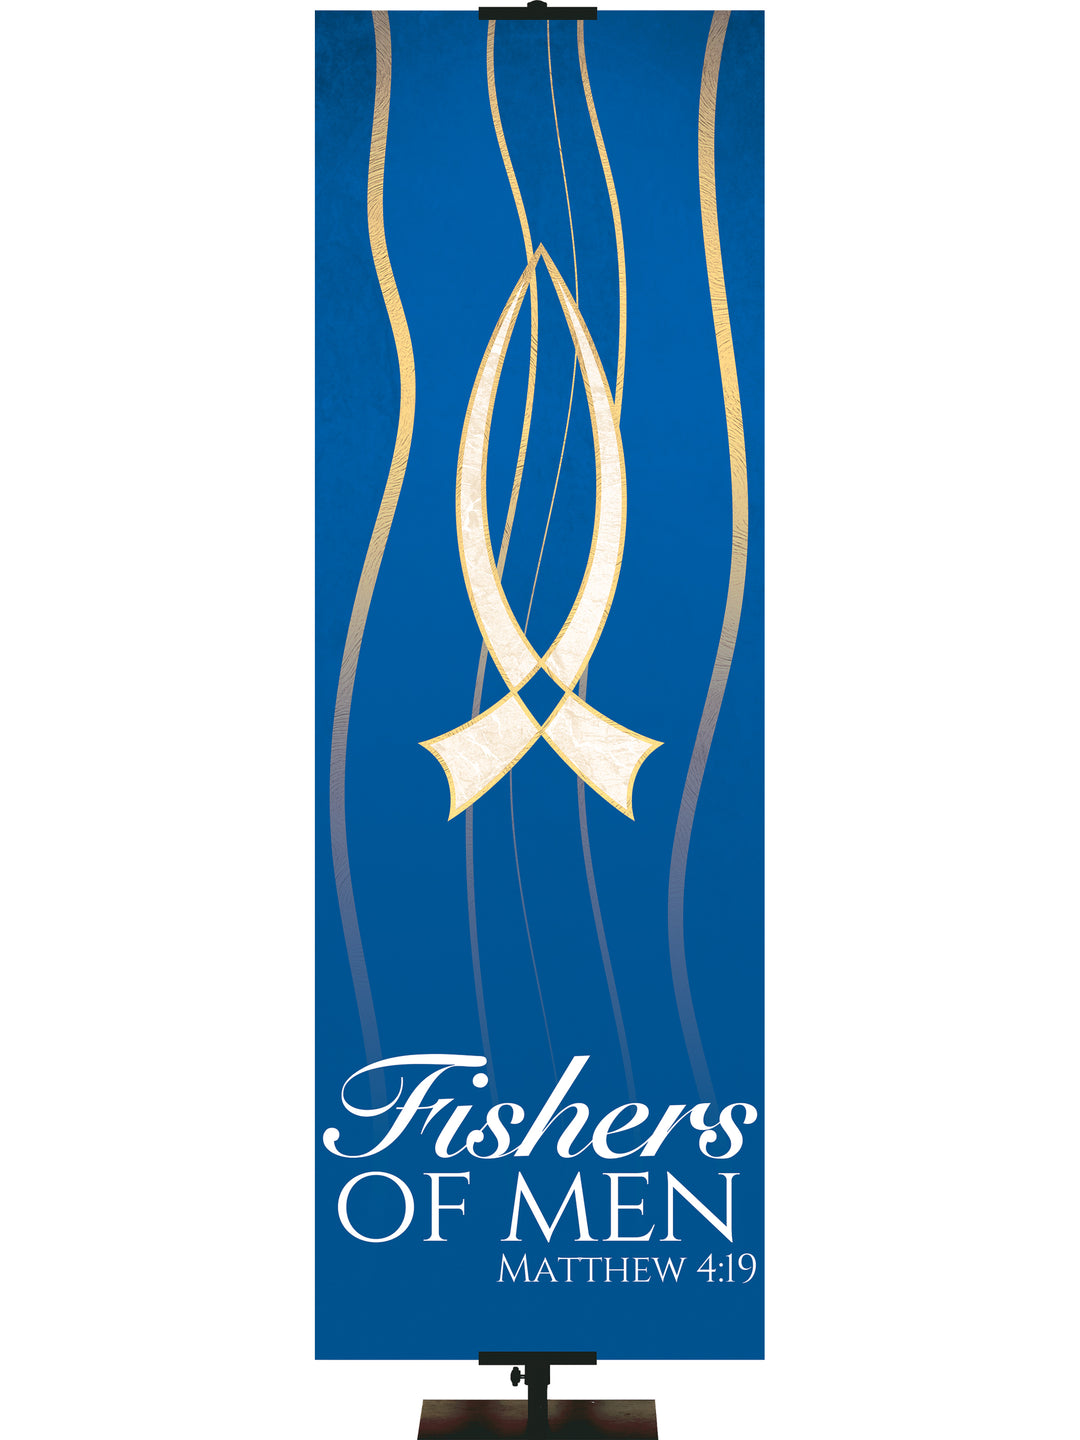 Experiencing God Symbols and Phrases Fish, Fishers of Men - Liturgical Banners - PraiseBanners